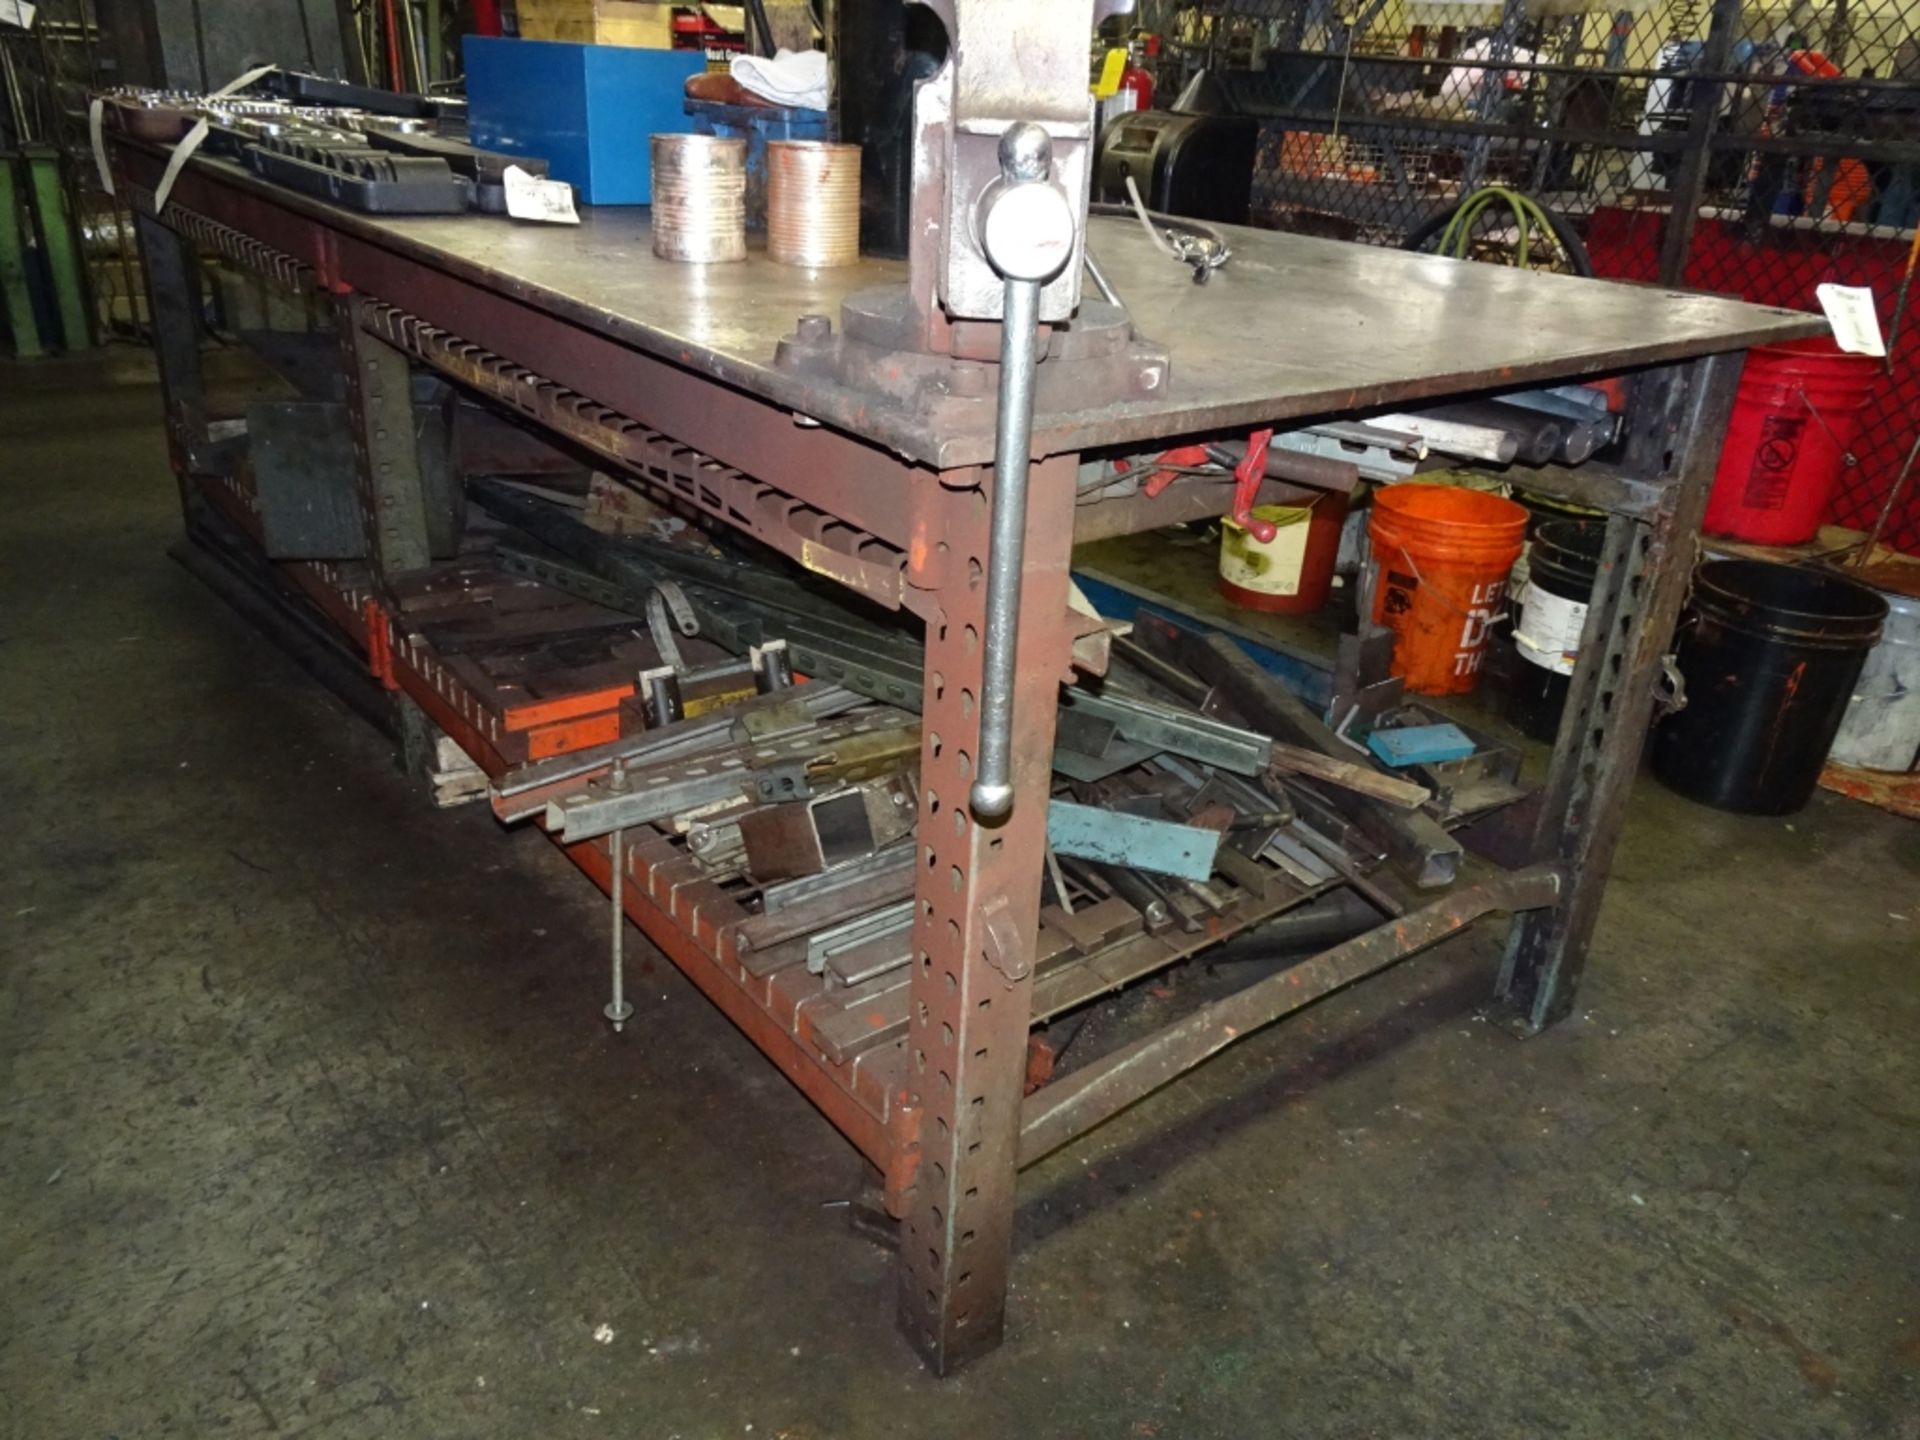 10' x 4' Custom Fabricated Welding Table w/ Vise and Misc Metals - Image 6 of 6